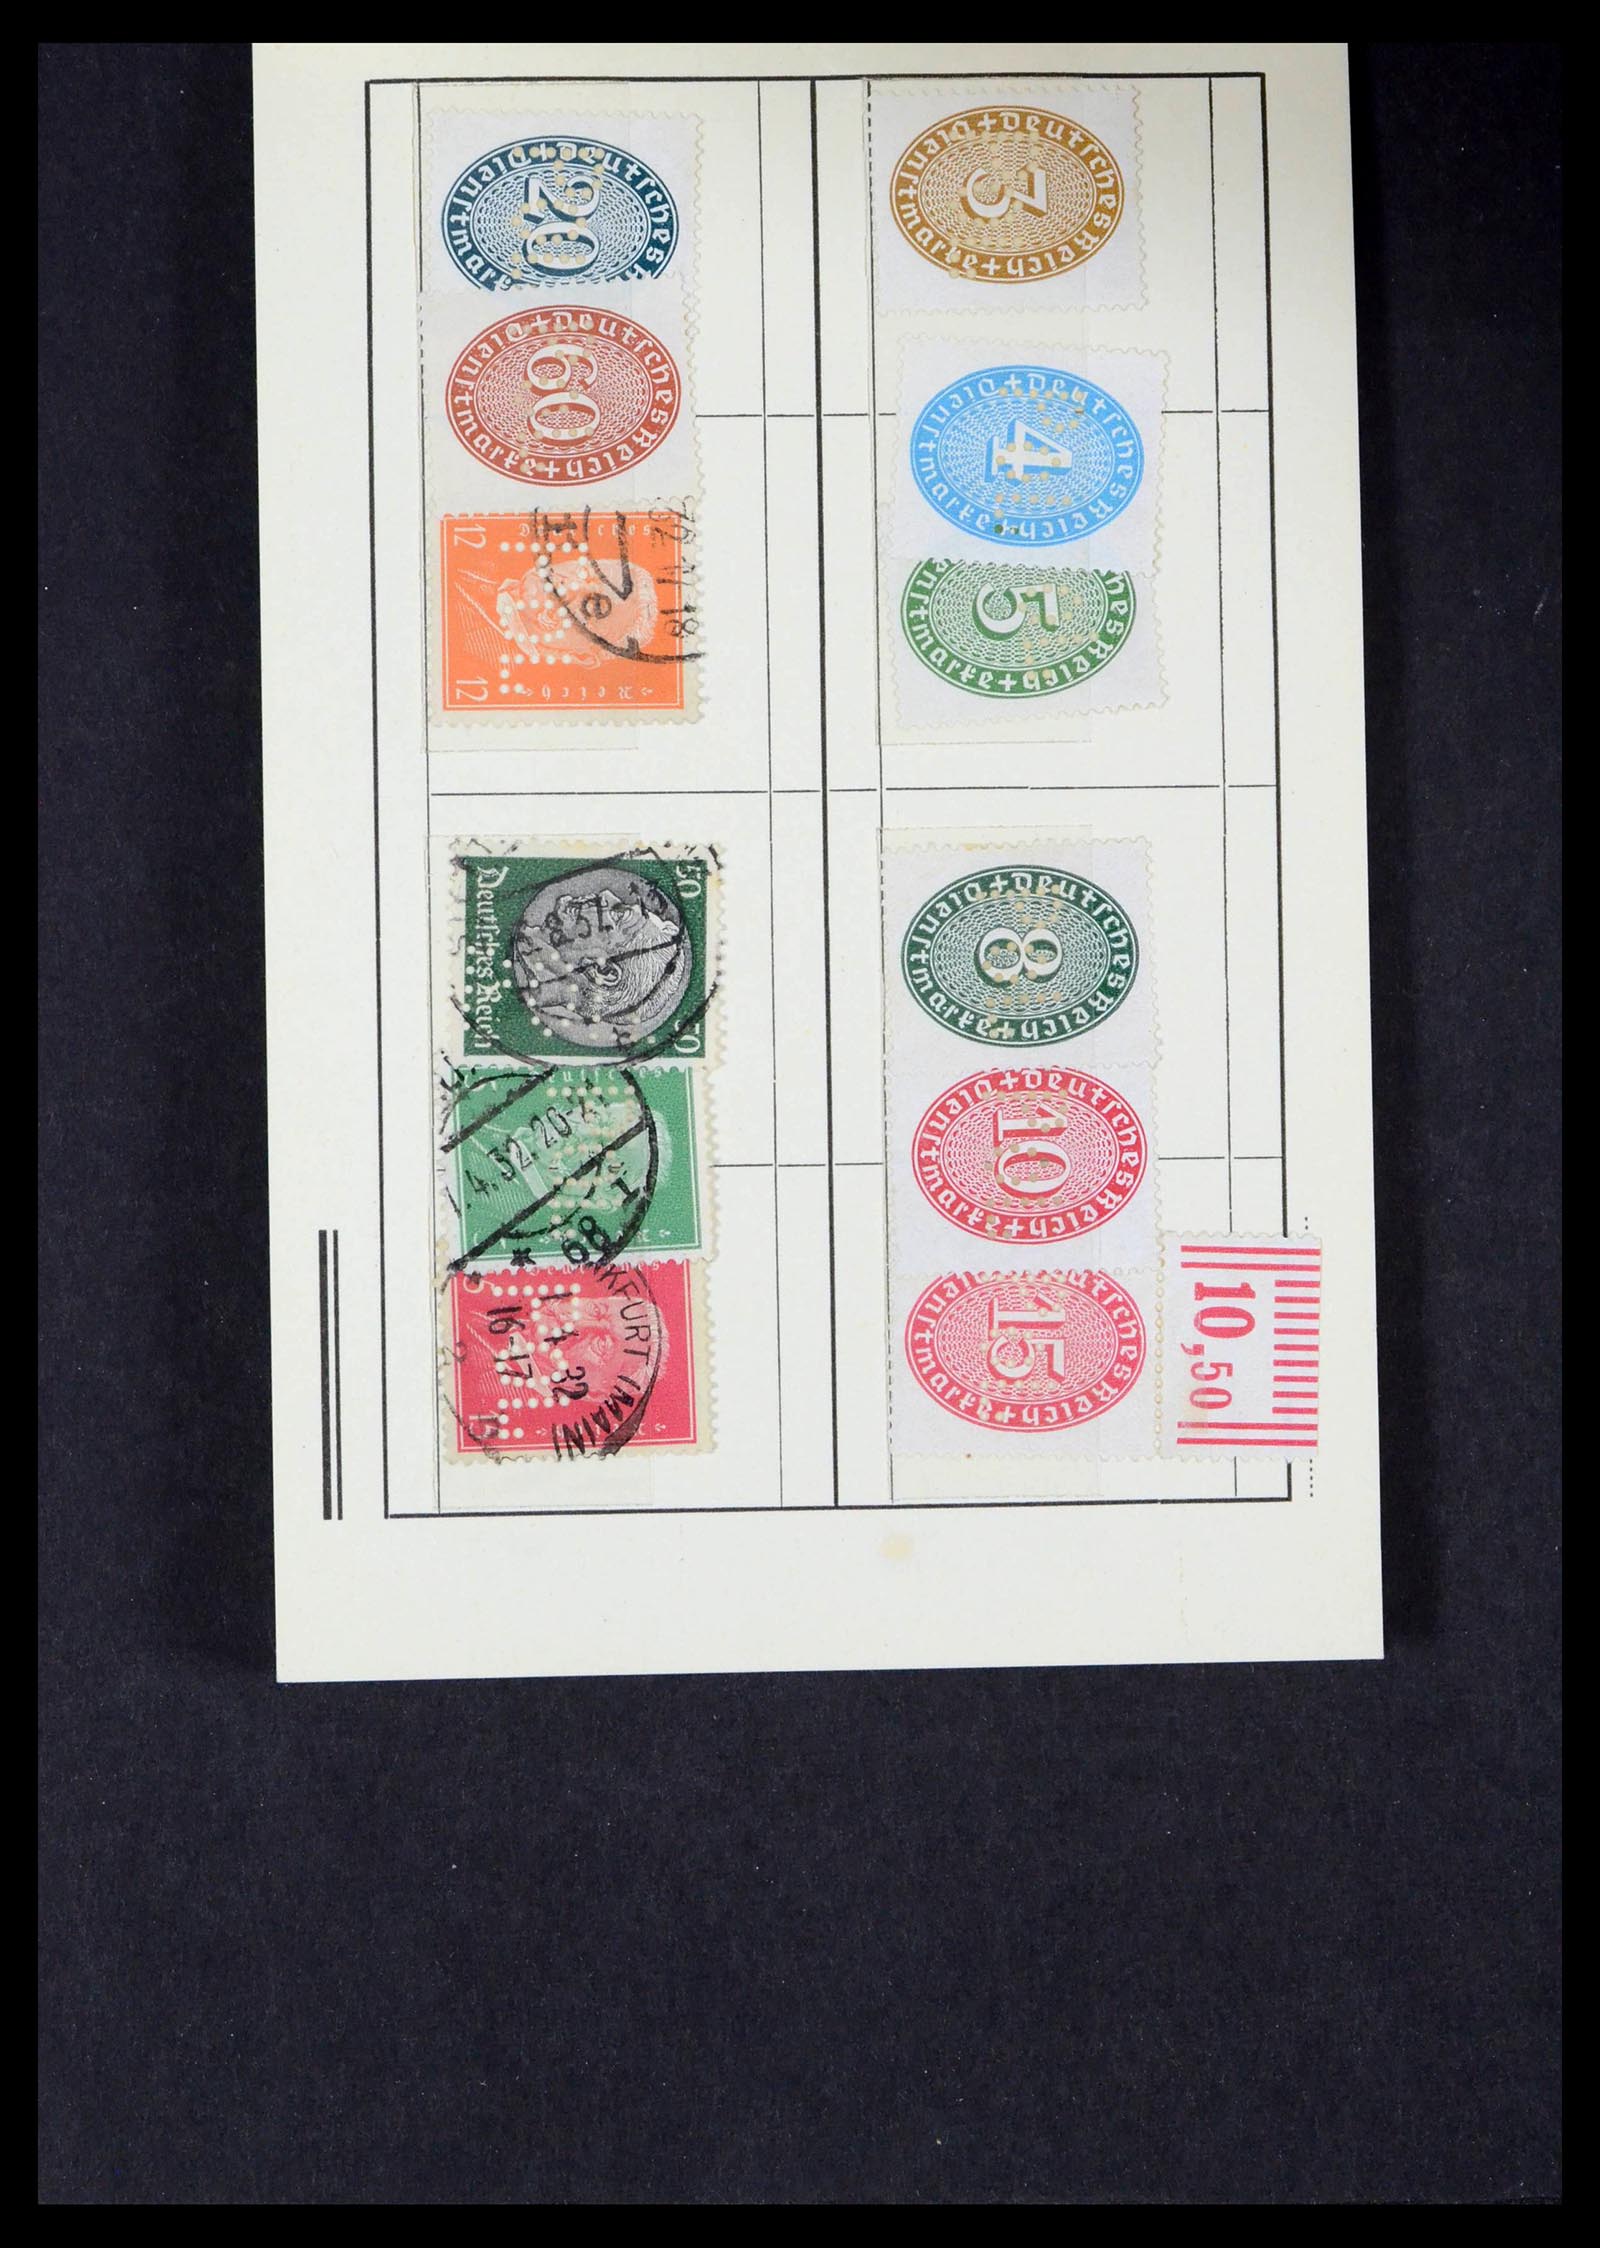 39458 0021 - Stamp collection 39458 Germany POL lochungen 1926-1955.